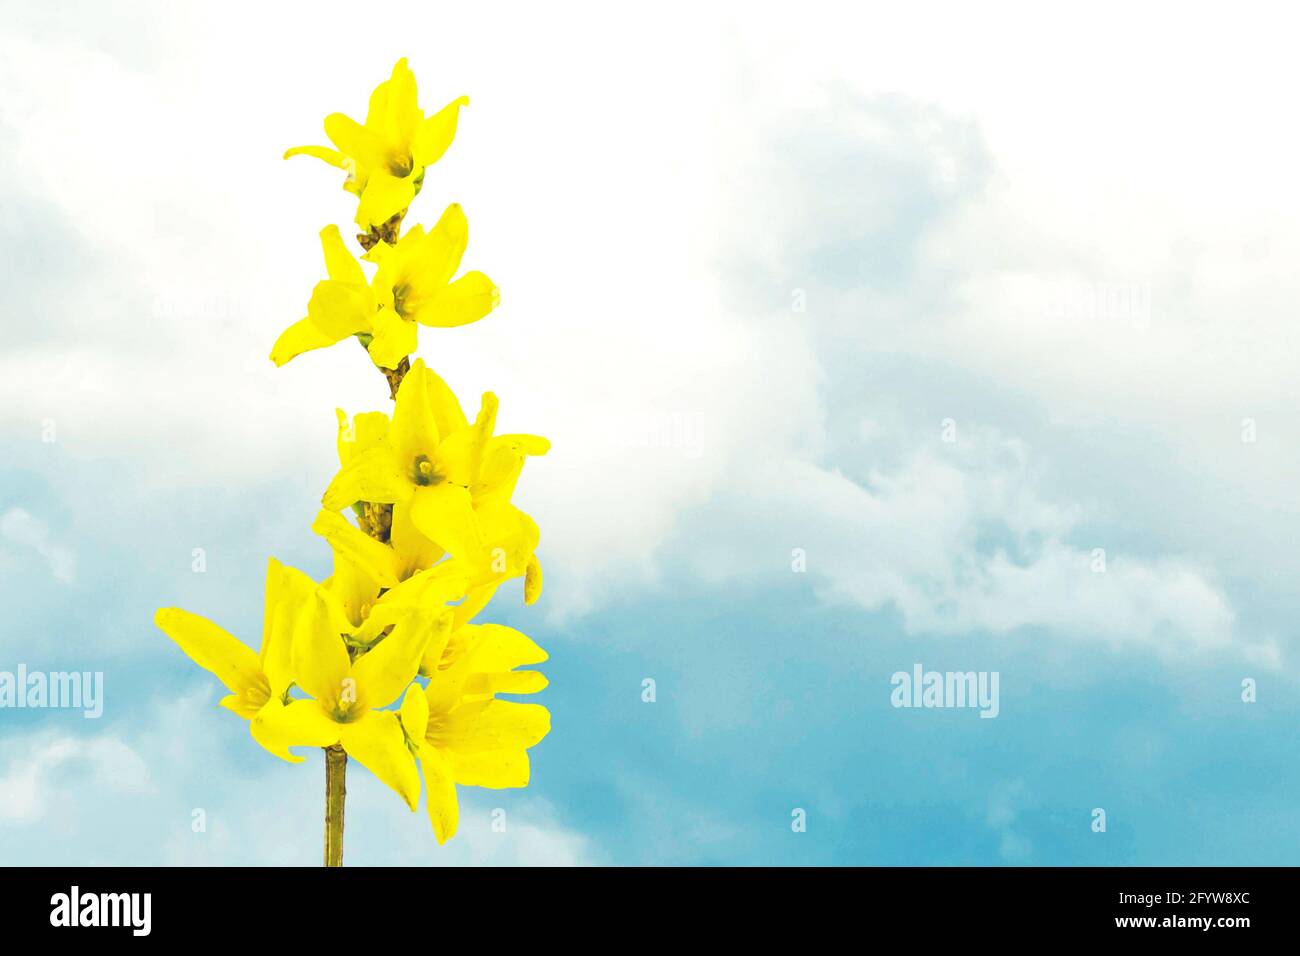 Yellow forsythia spring flower branch blooming on blue sky white clouds background Stock Photo